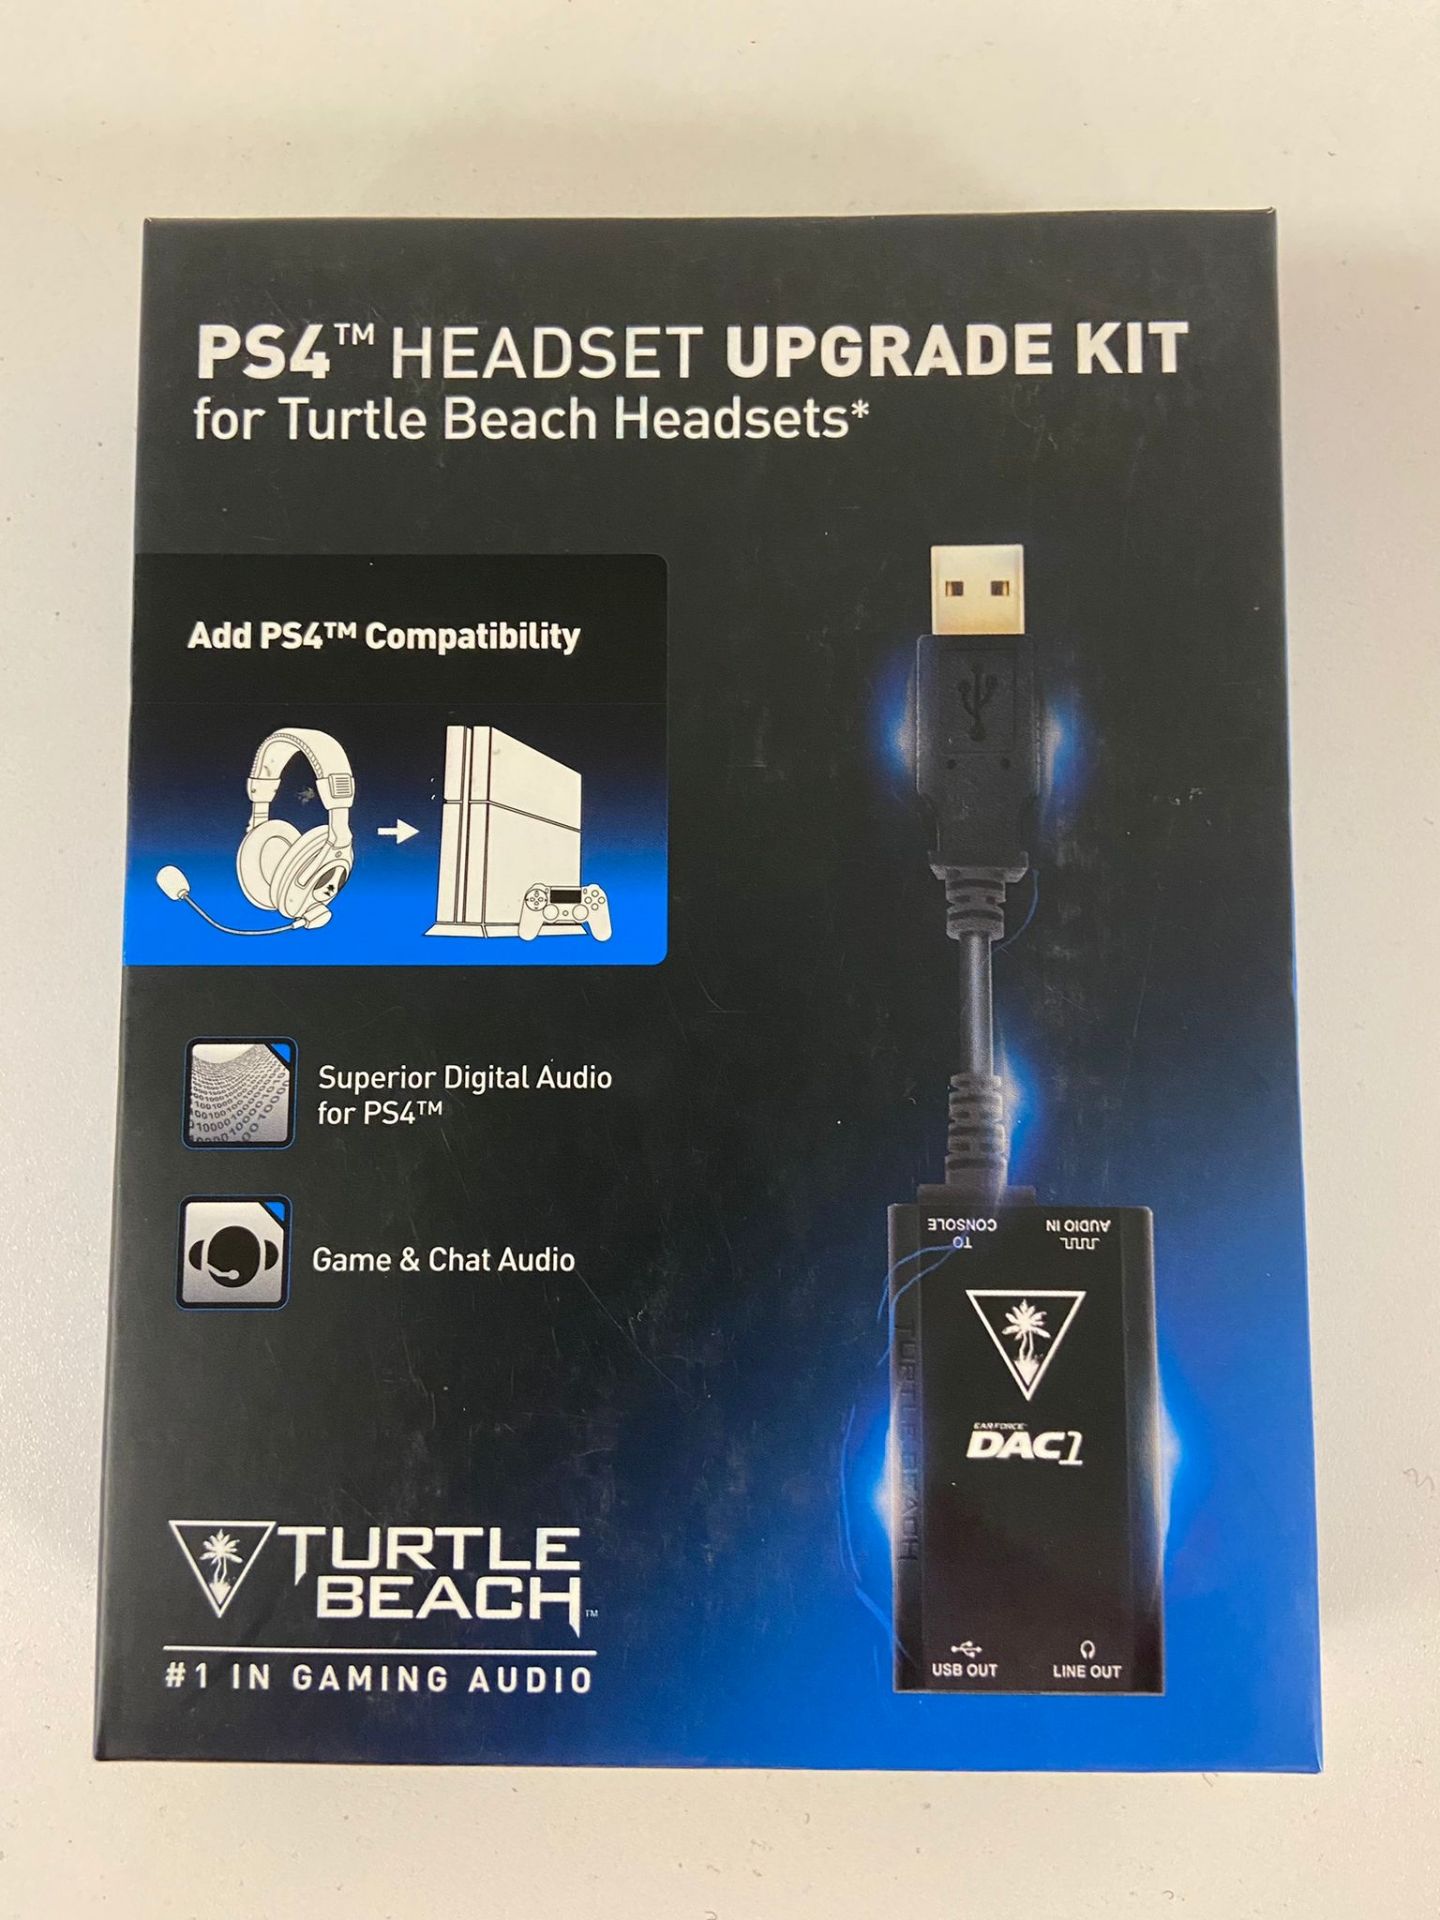 7 x PS4 Headset Upgrade Kit for Turtle Beach Headsets - Image 3 of 3